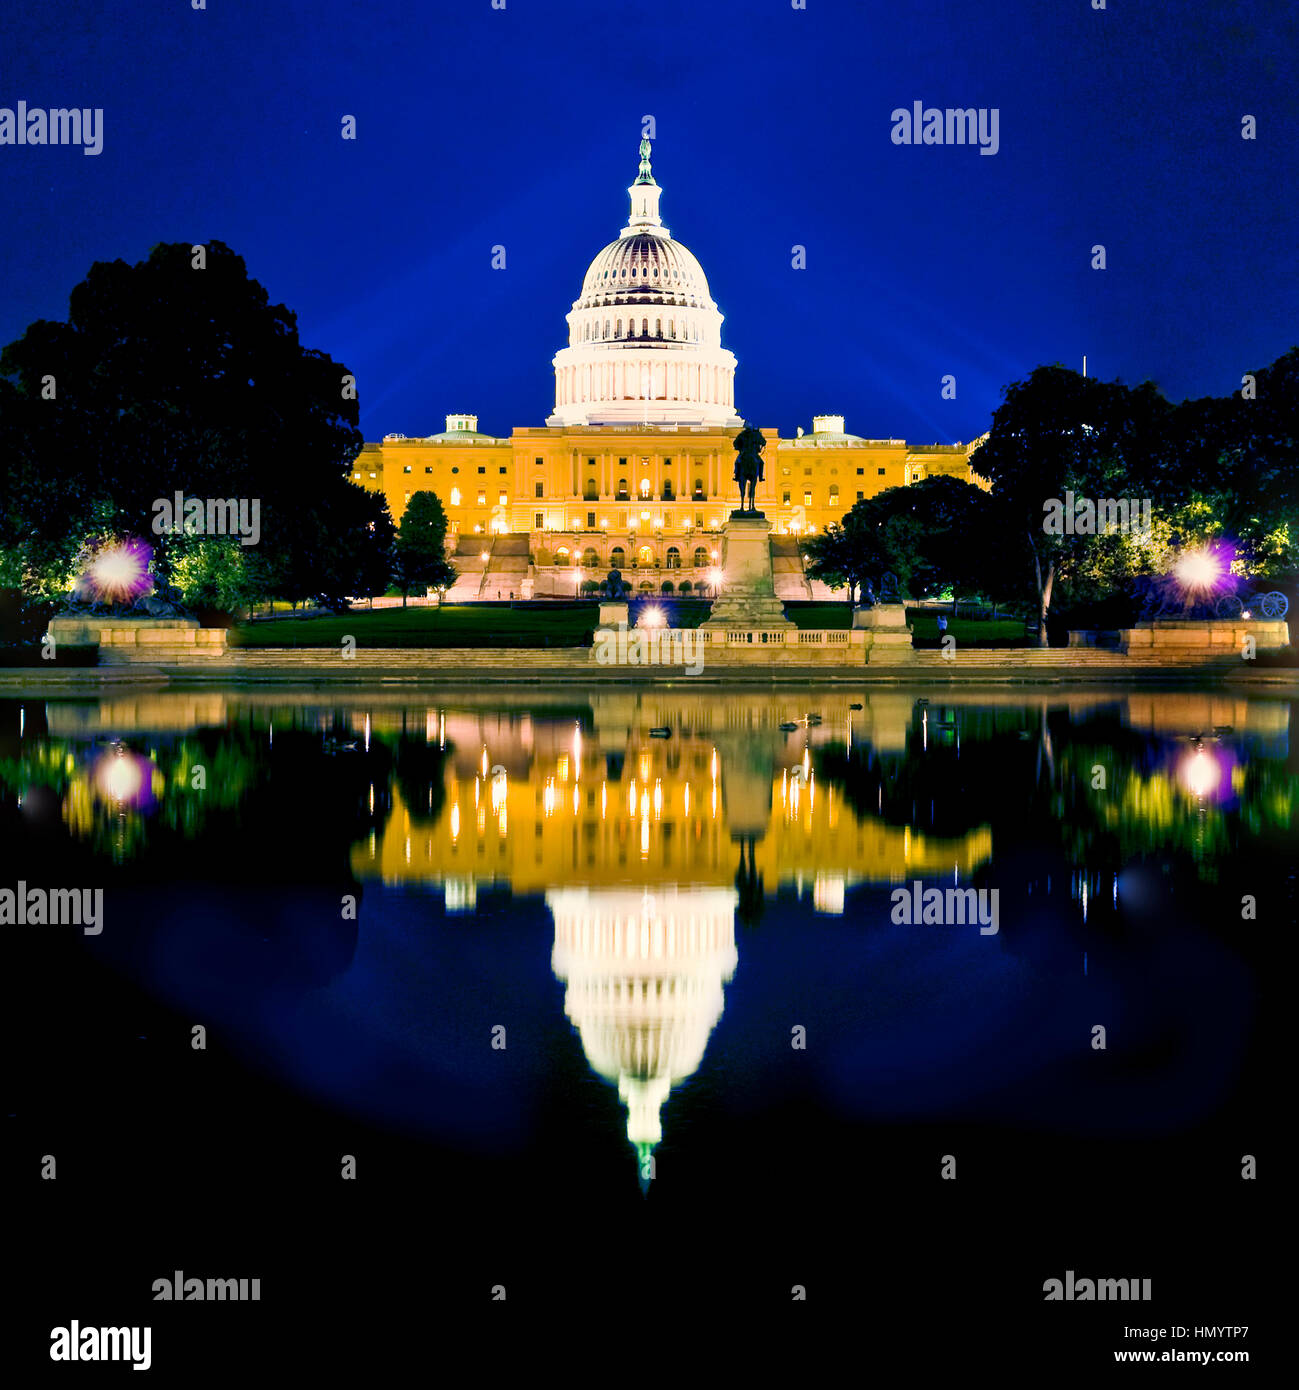 The United States Capitol Building at night with reflection in Washington DC Stock Photo